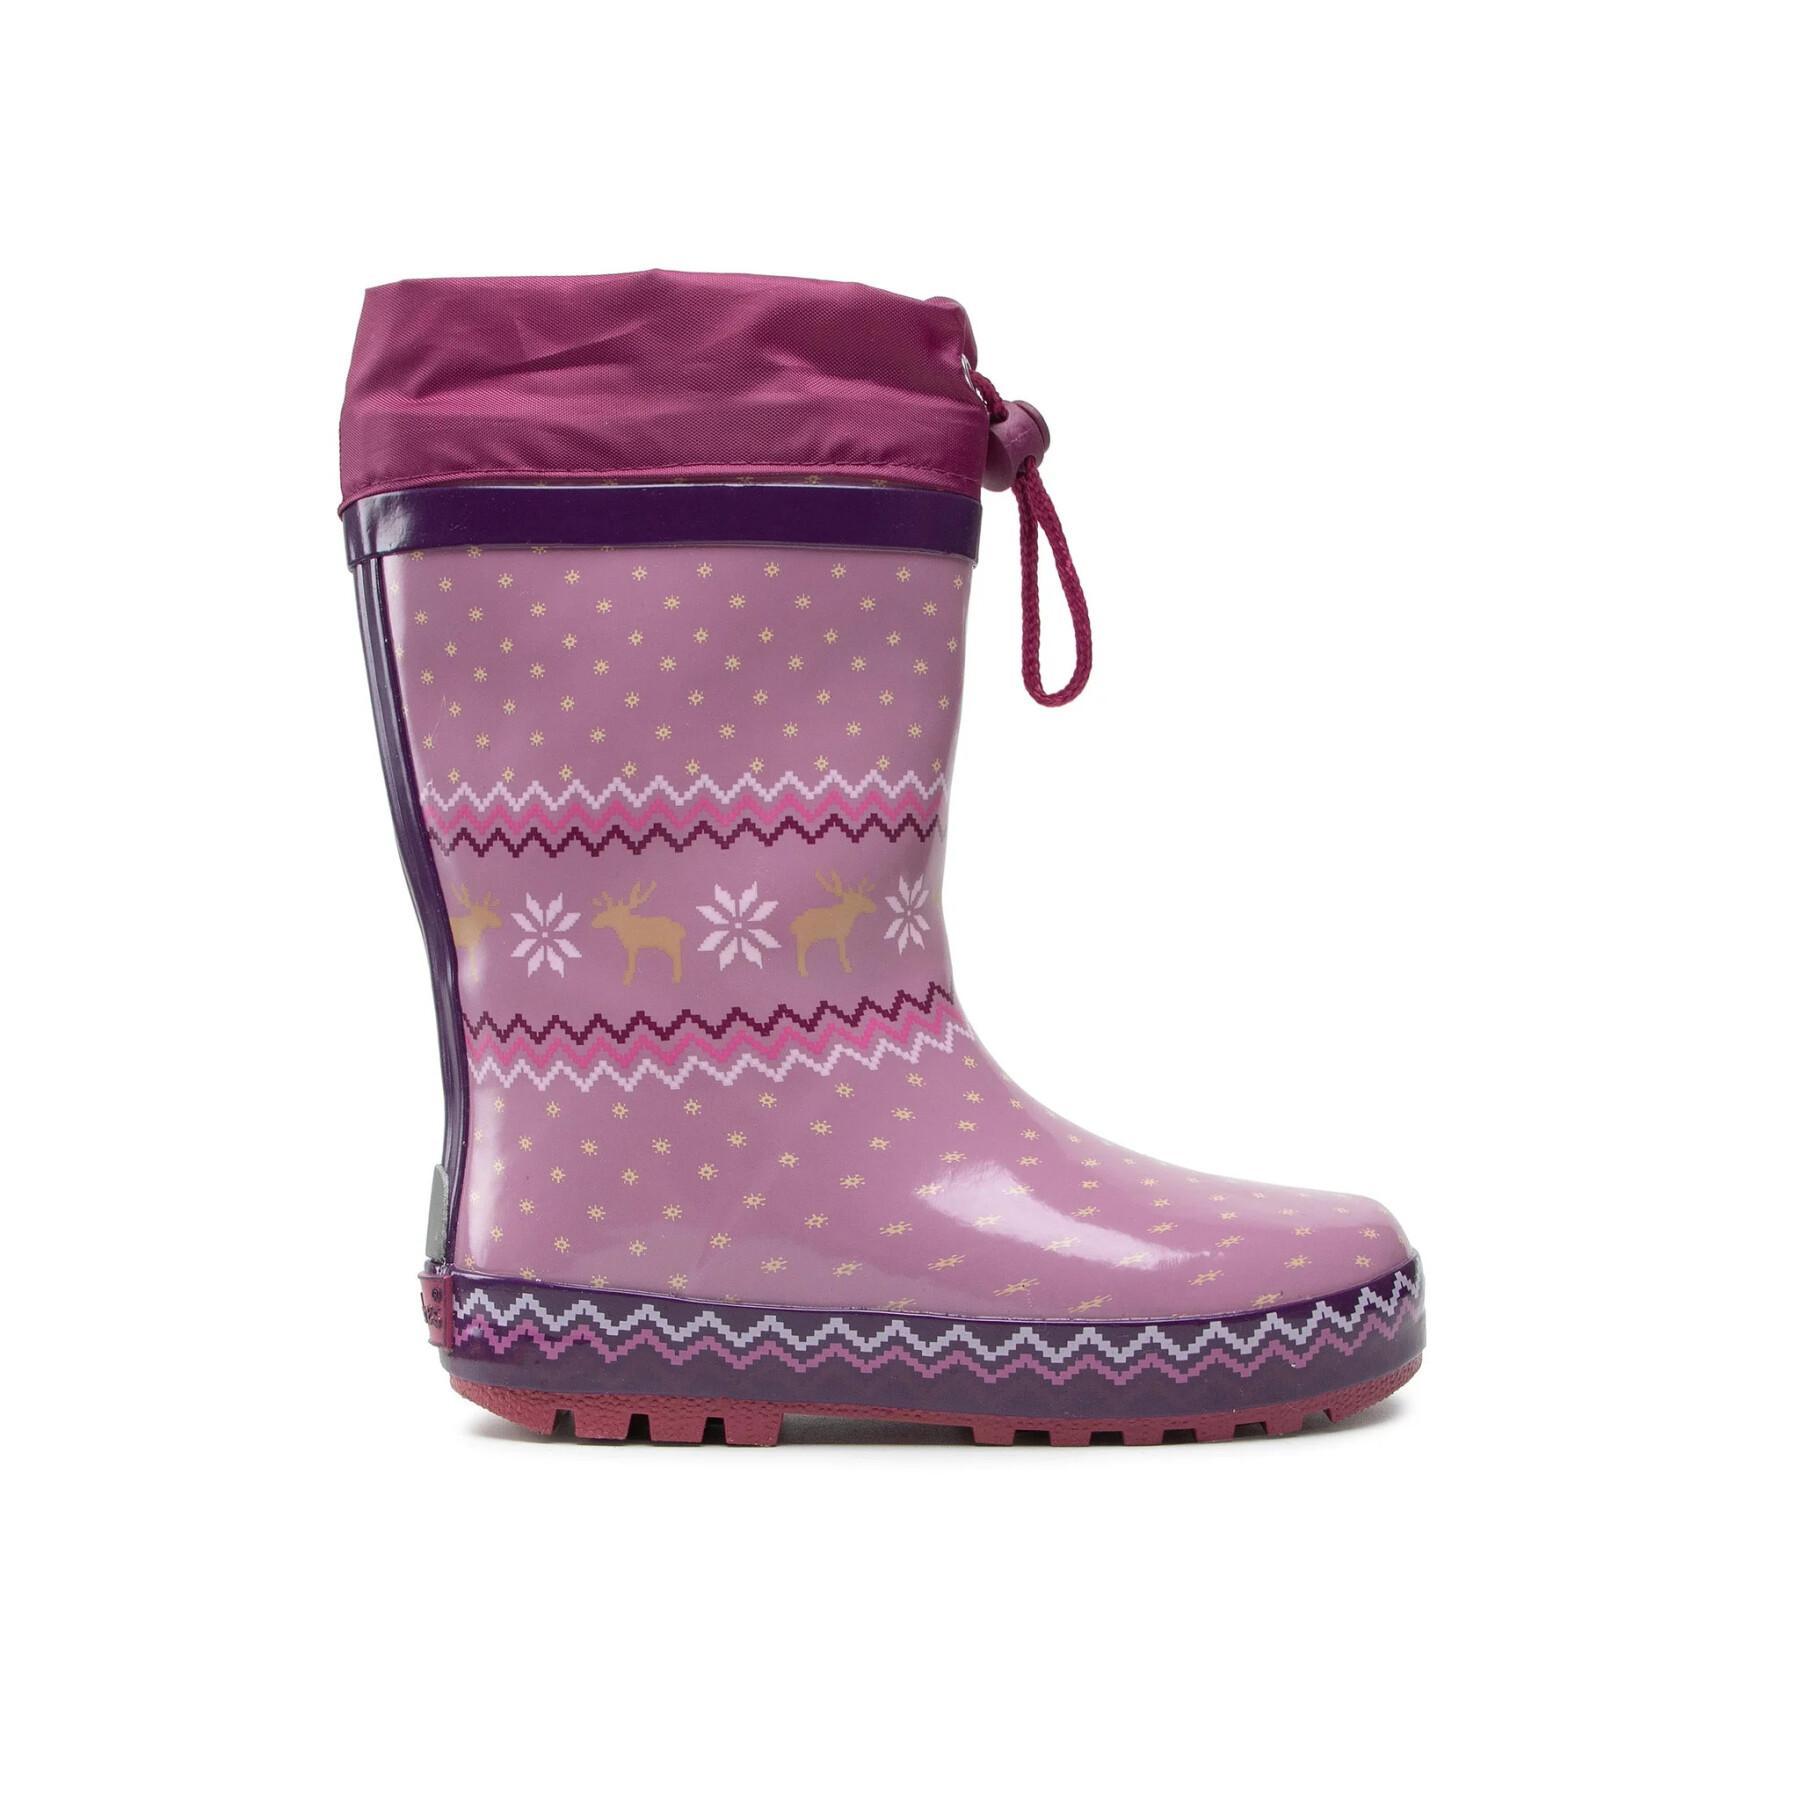 Baby rubber rain boots Playshoes Norway Lined